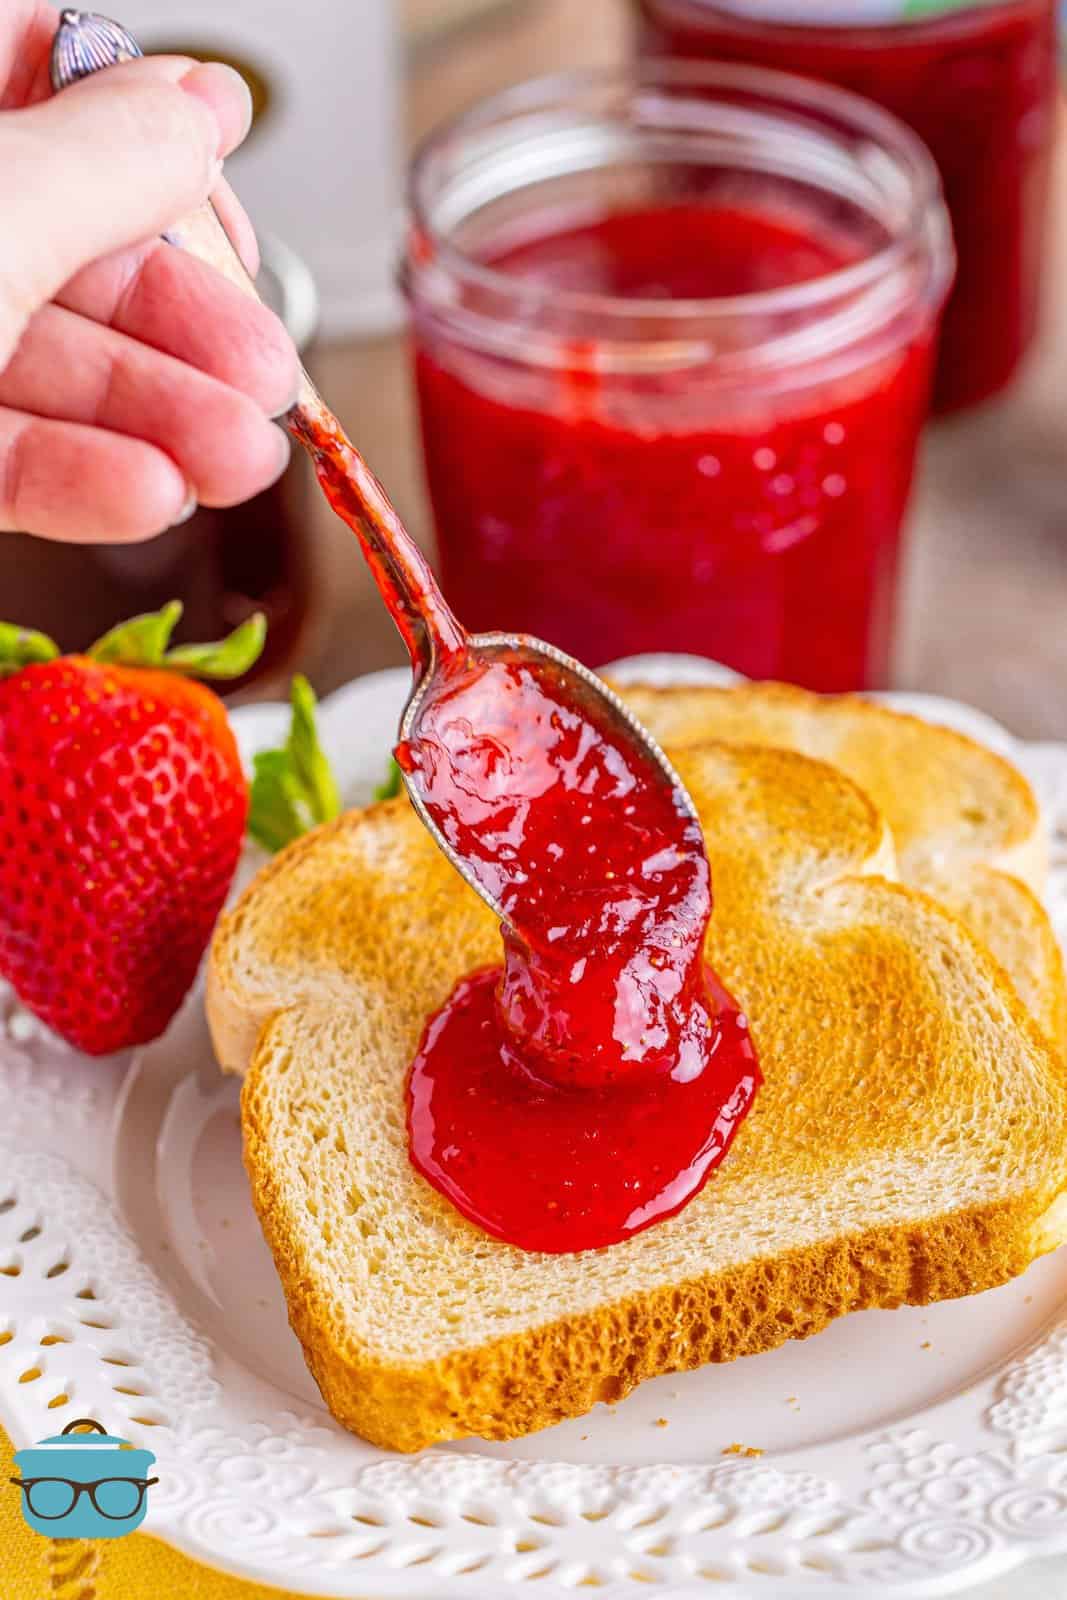 A hand putting a spoonful of strawberry jam on a piece of toast.